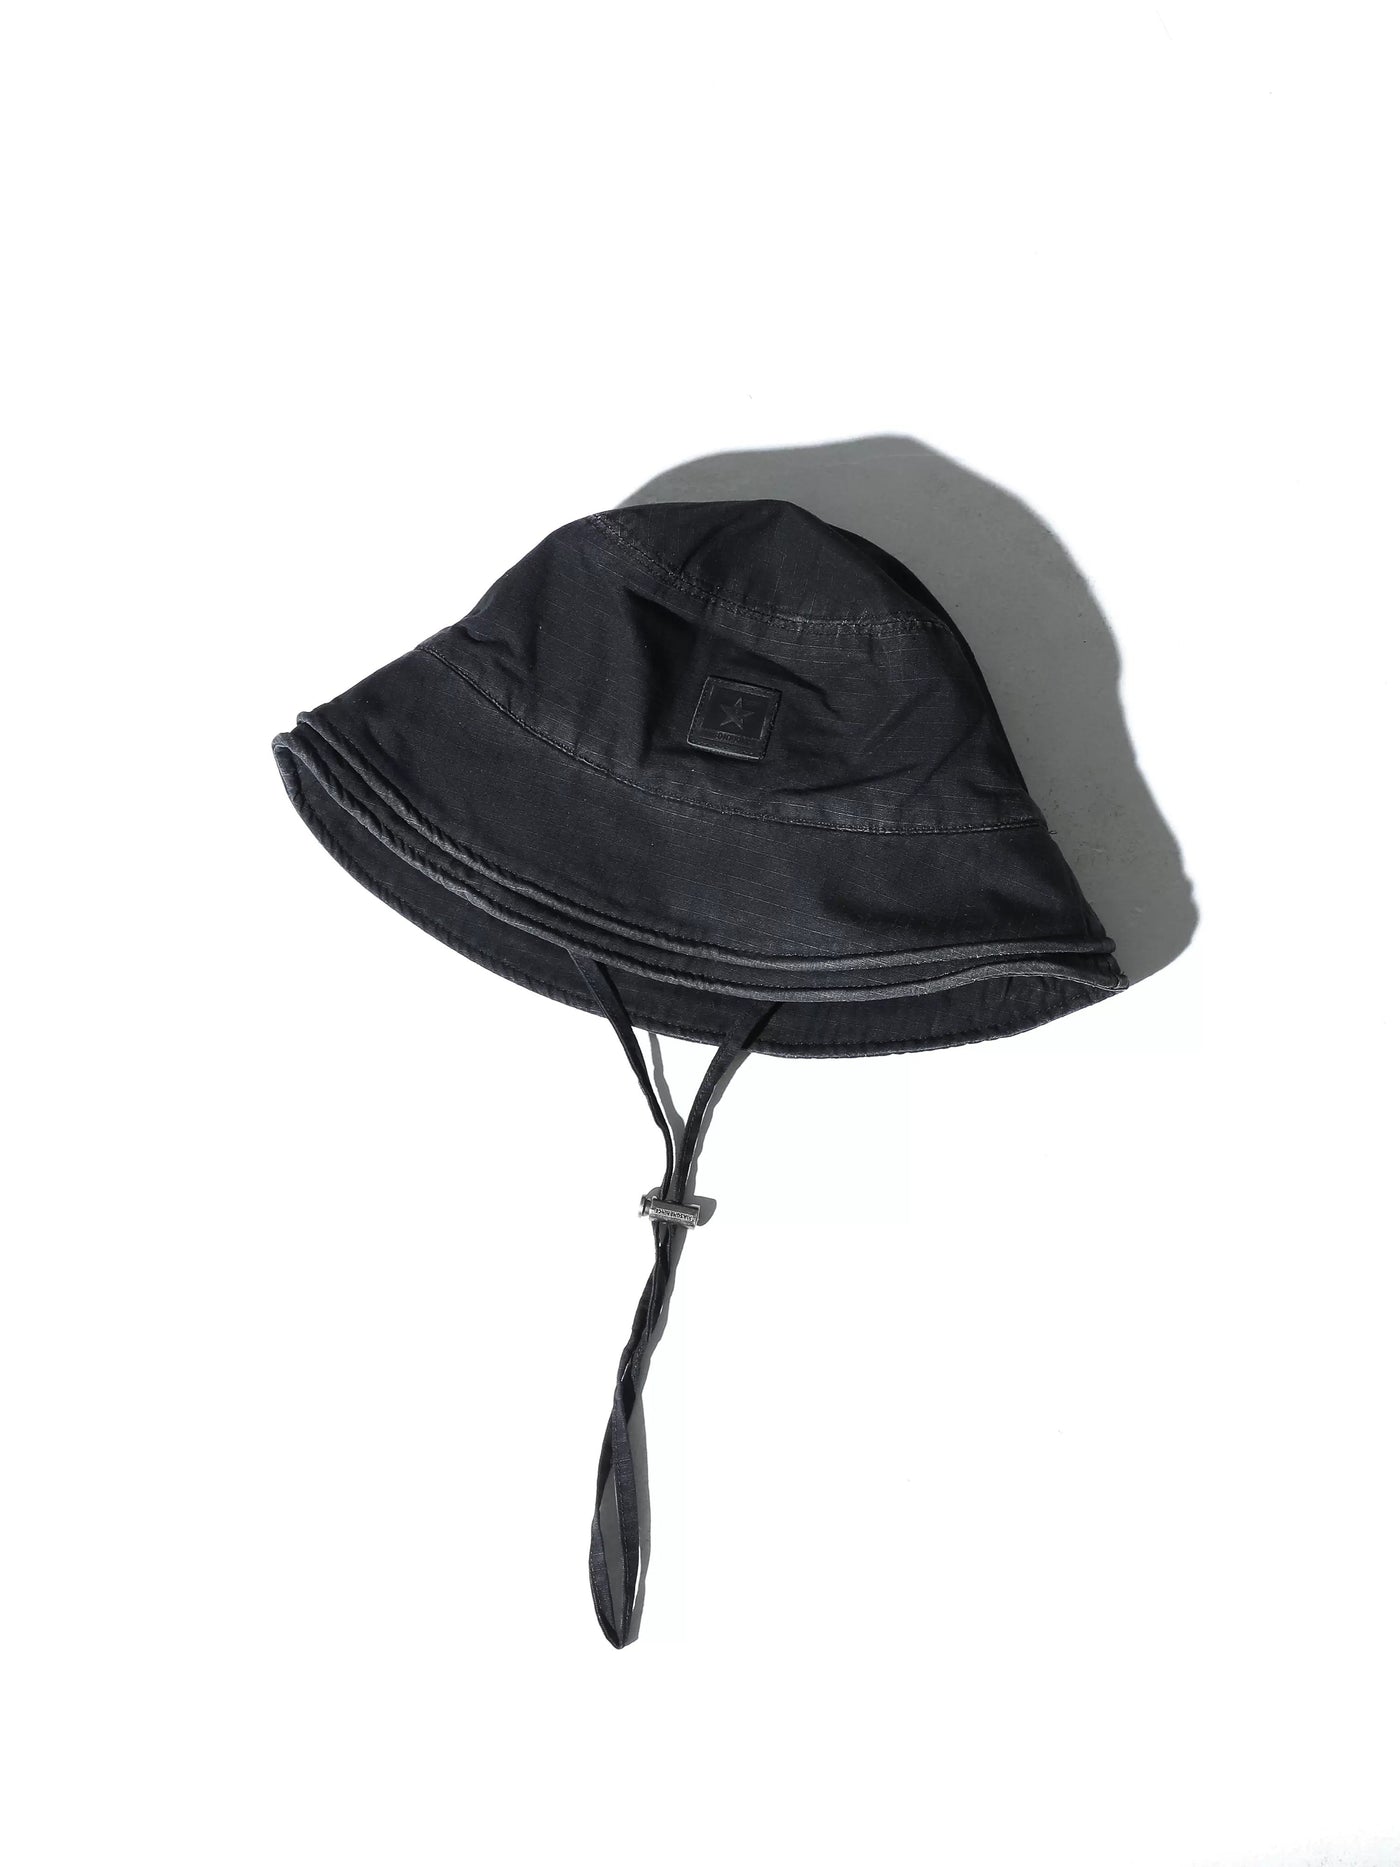 Washed Double-Layer Hat Korean Street Fashion Hat By Mason Prince Shop Online at OH Vault